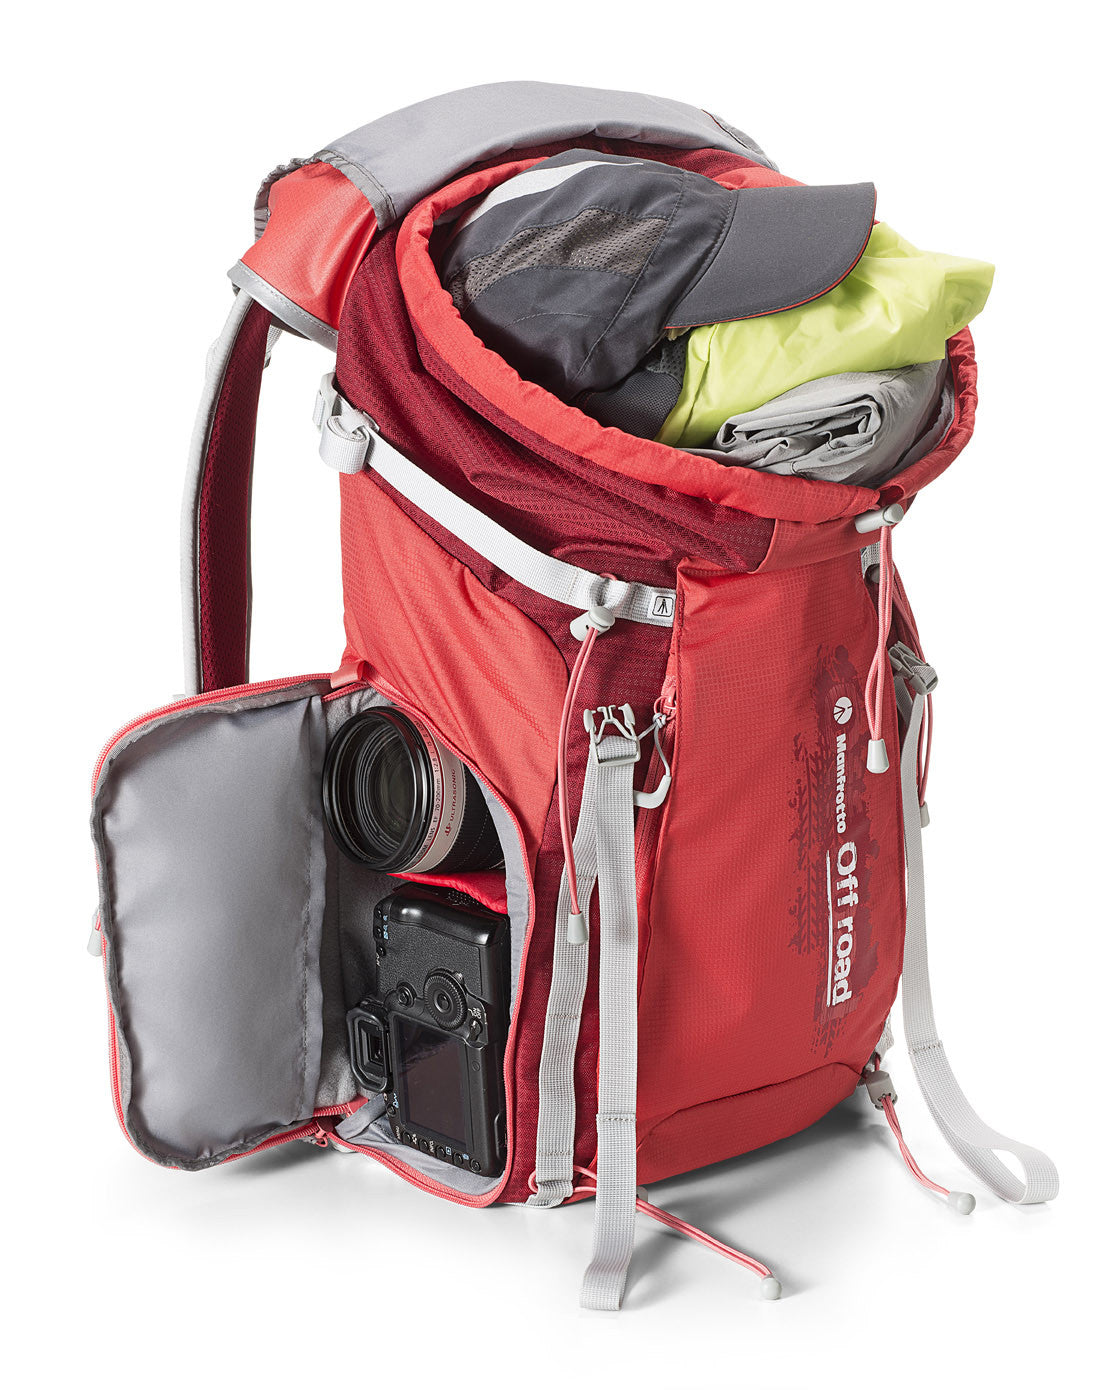 Manfrotto Off Road Hiking Backpack Red, bags backpacks, Manfrotto - Pictureline  - 4